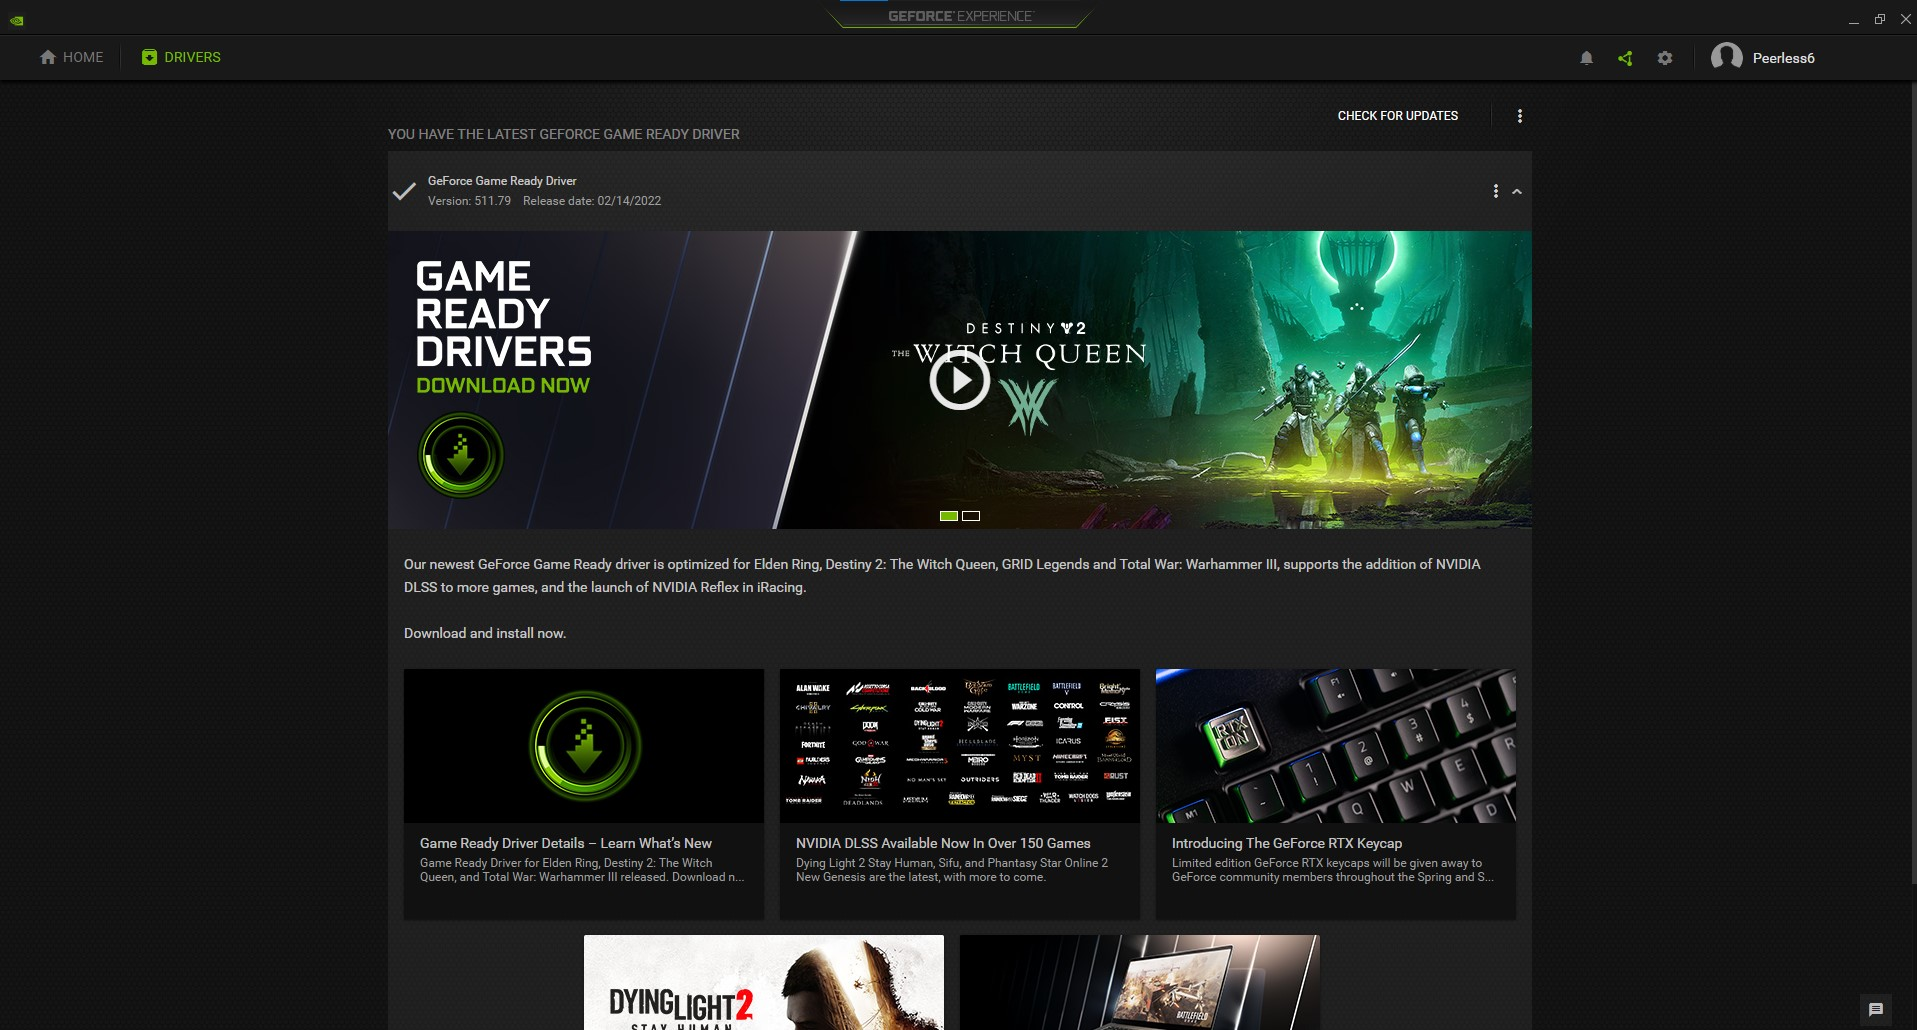 If you have an NVIDIA GPU, you can also use the NVIDIA GeForce Experience software to receive graphics driver updates. If you have an AMD GPU, you can update your graphics card drivers using the AMD control center